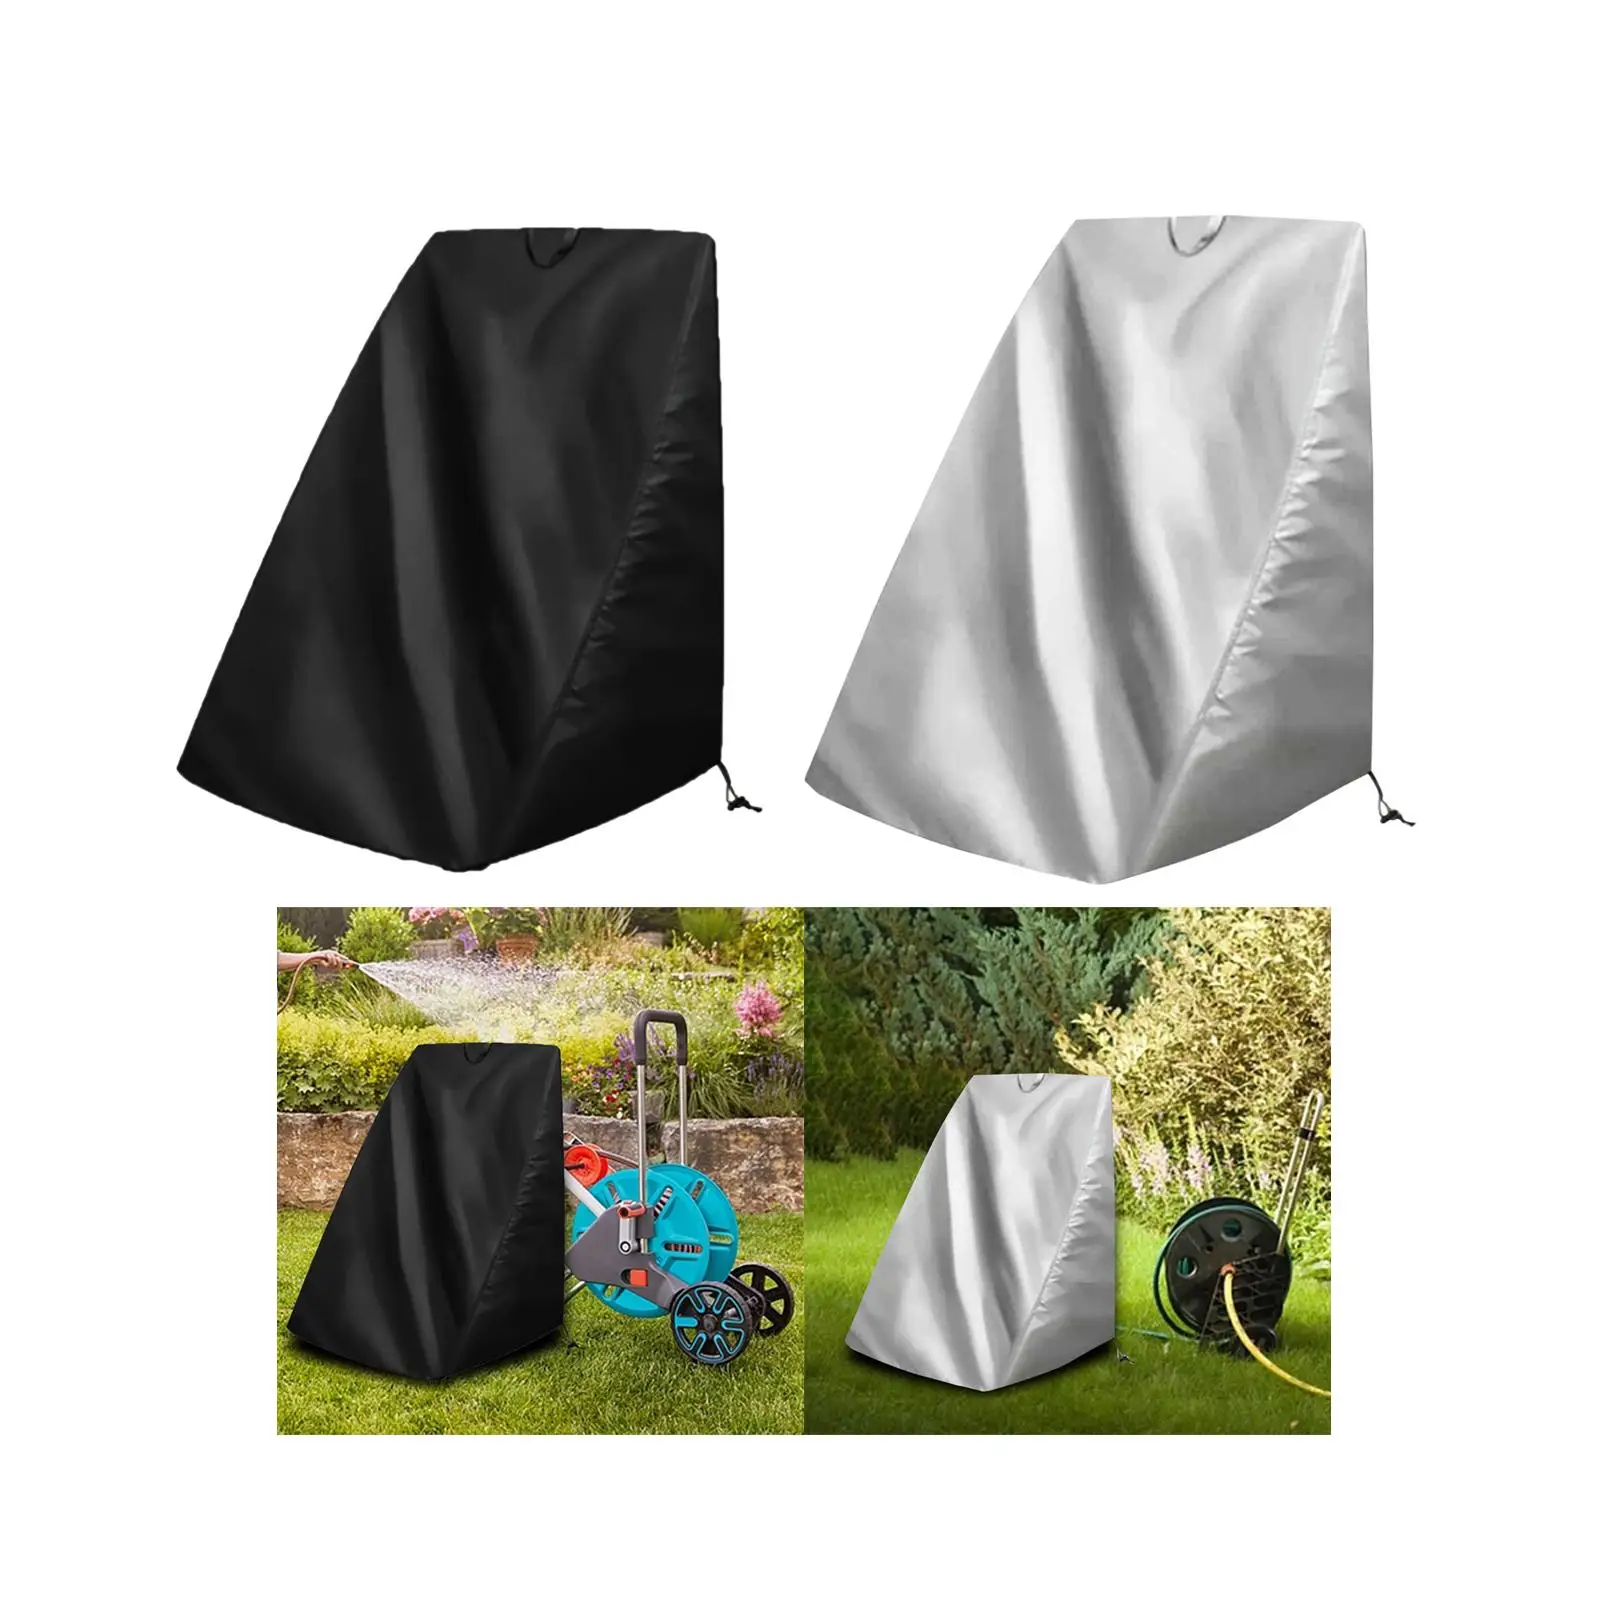 Hose Reel Covers Lawn Patio Accs Hose Reel Cart Cover for Hose Reel Holder Home Rewind Hose Storage Rack Water Pipe Holder Stand